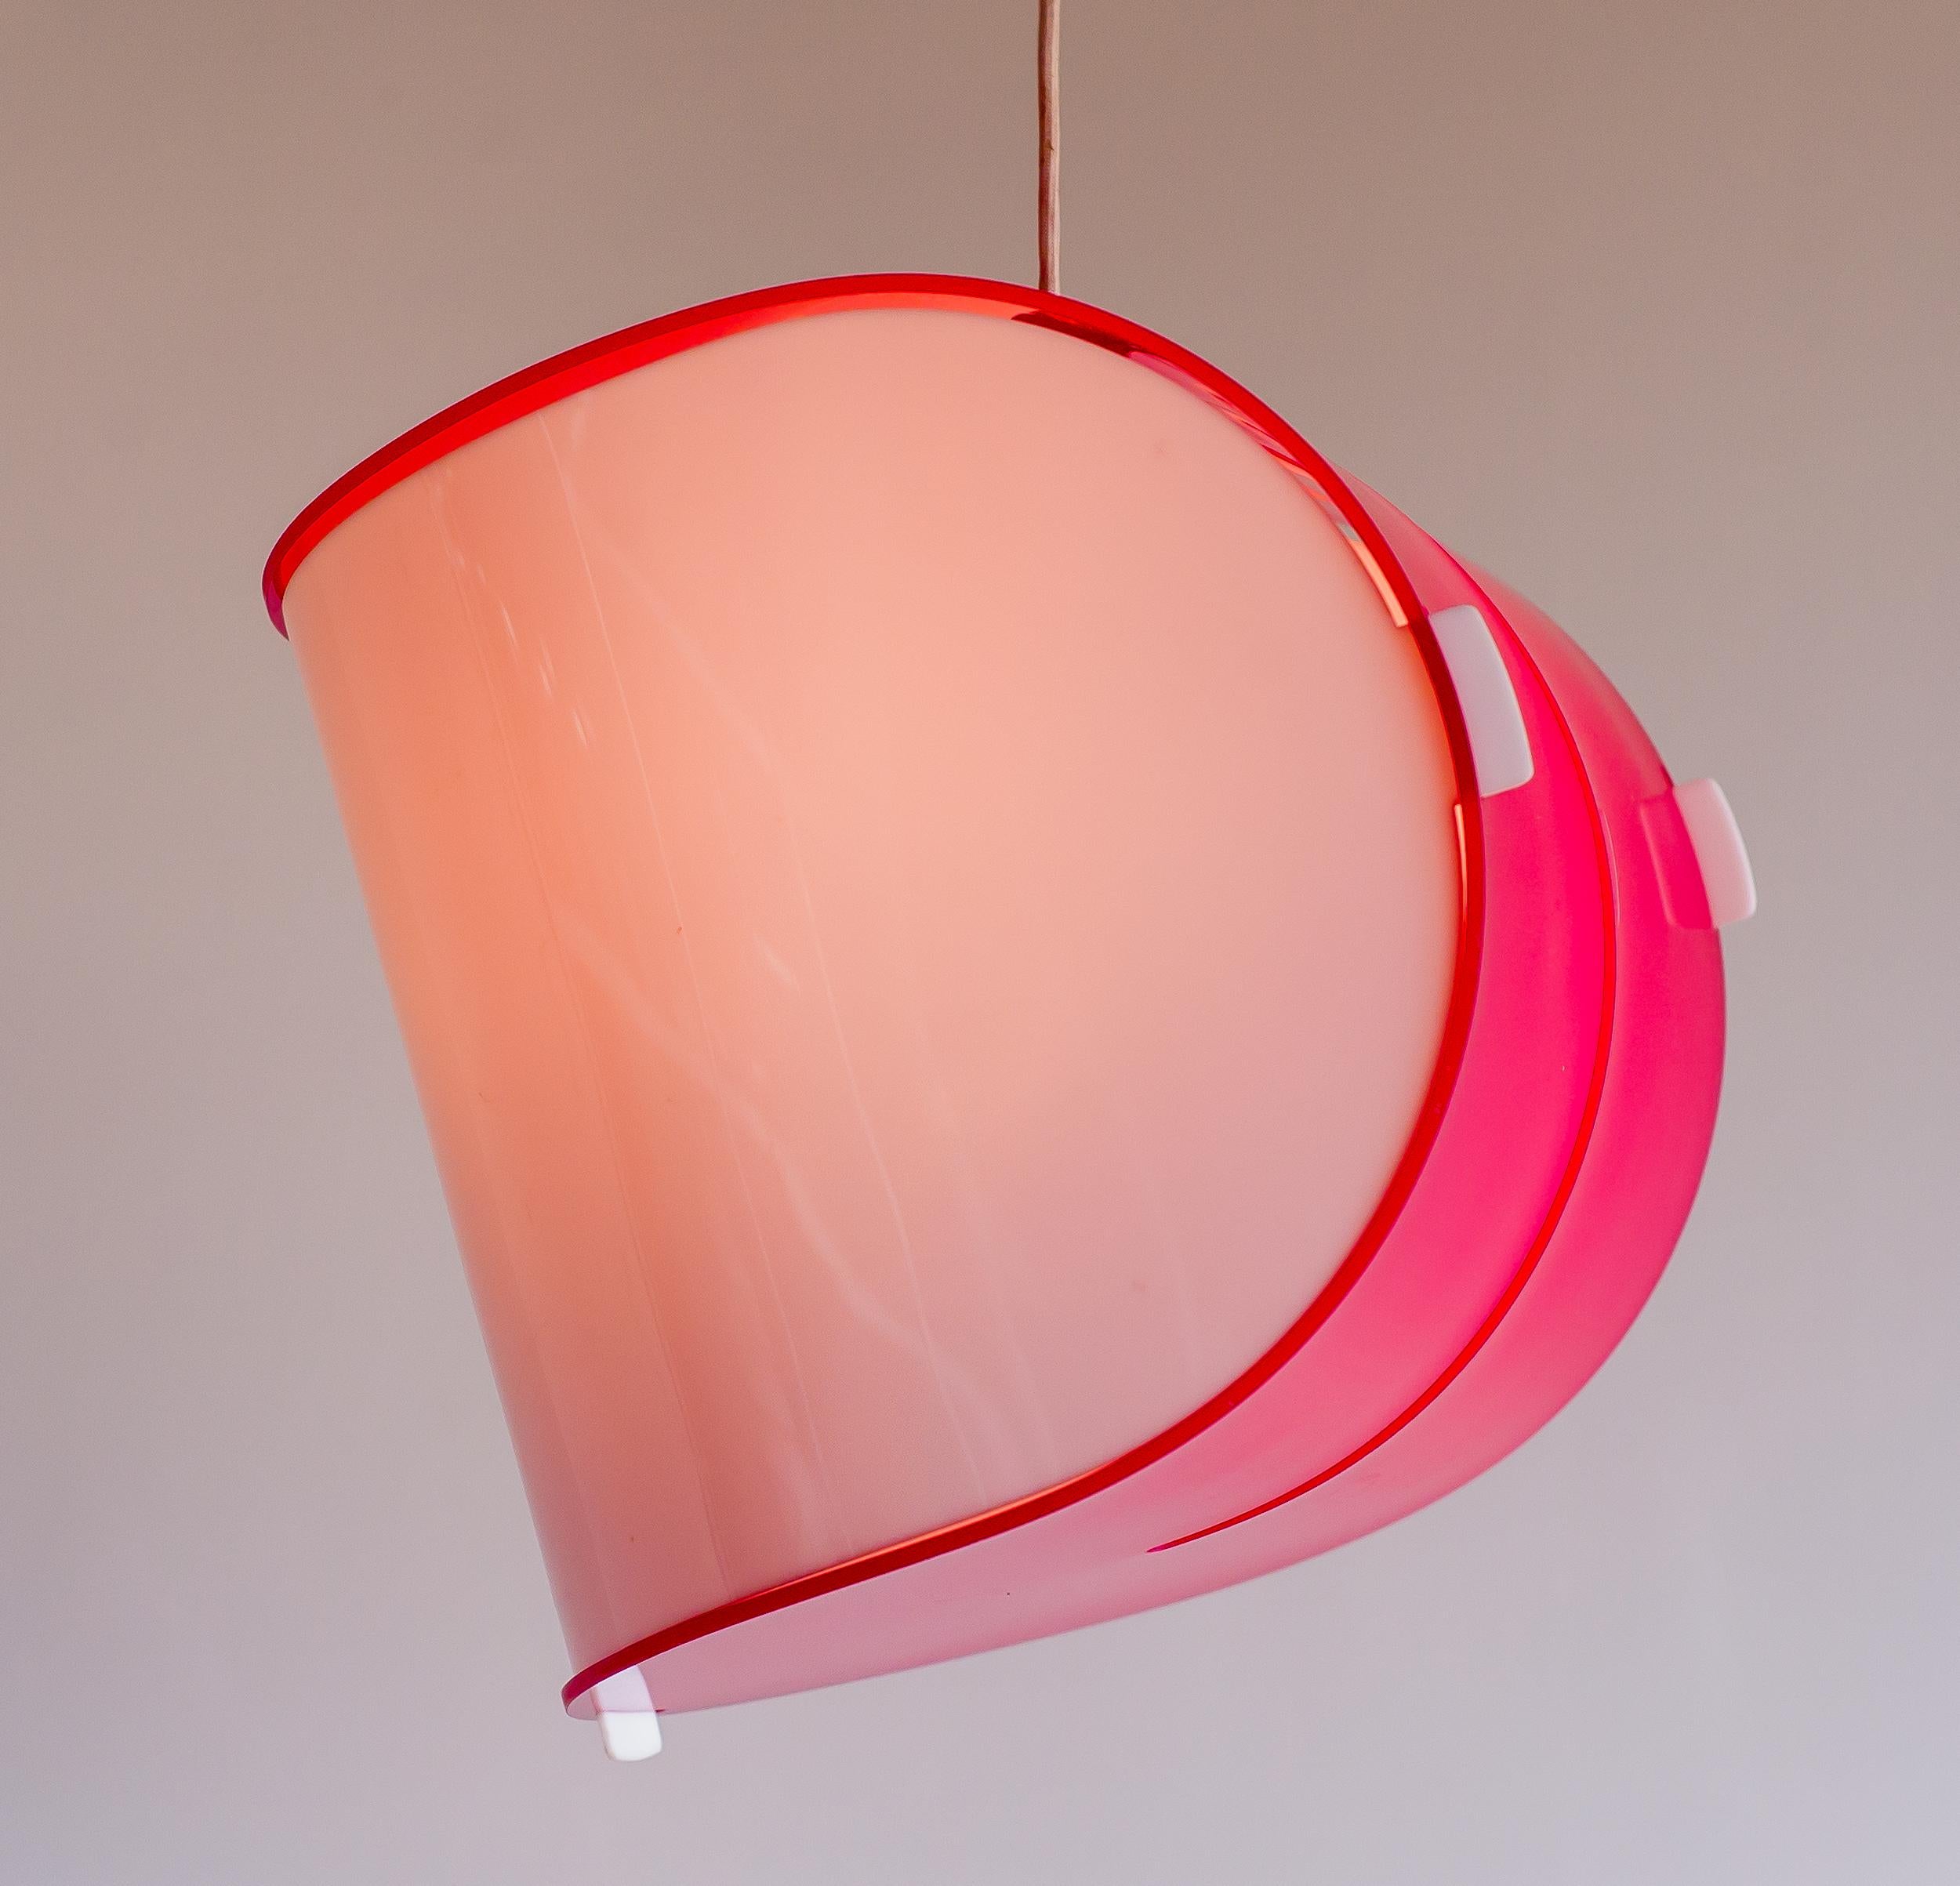 Very rare model 4065 hanging lamp in white and red acrylic, made by Kartell, Milan.
Smart design provides many shade positions. Socket for standard E27 light bulb, max 75 W.
The last photo of an orange example was made in the Kartell museum in